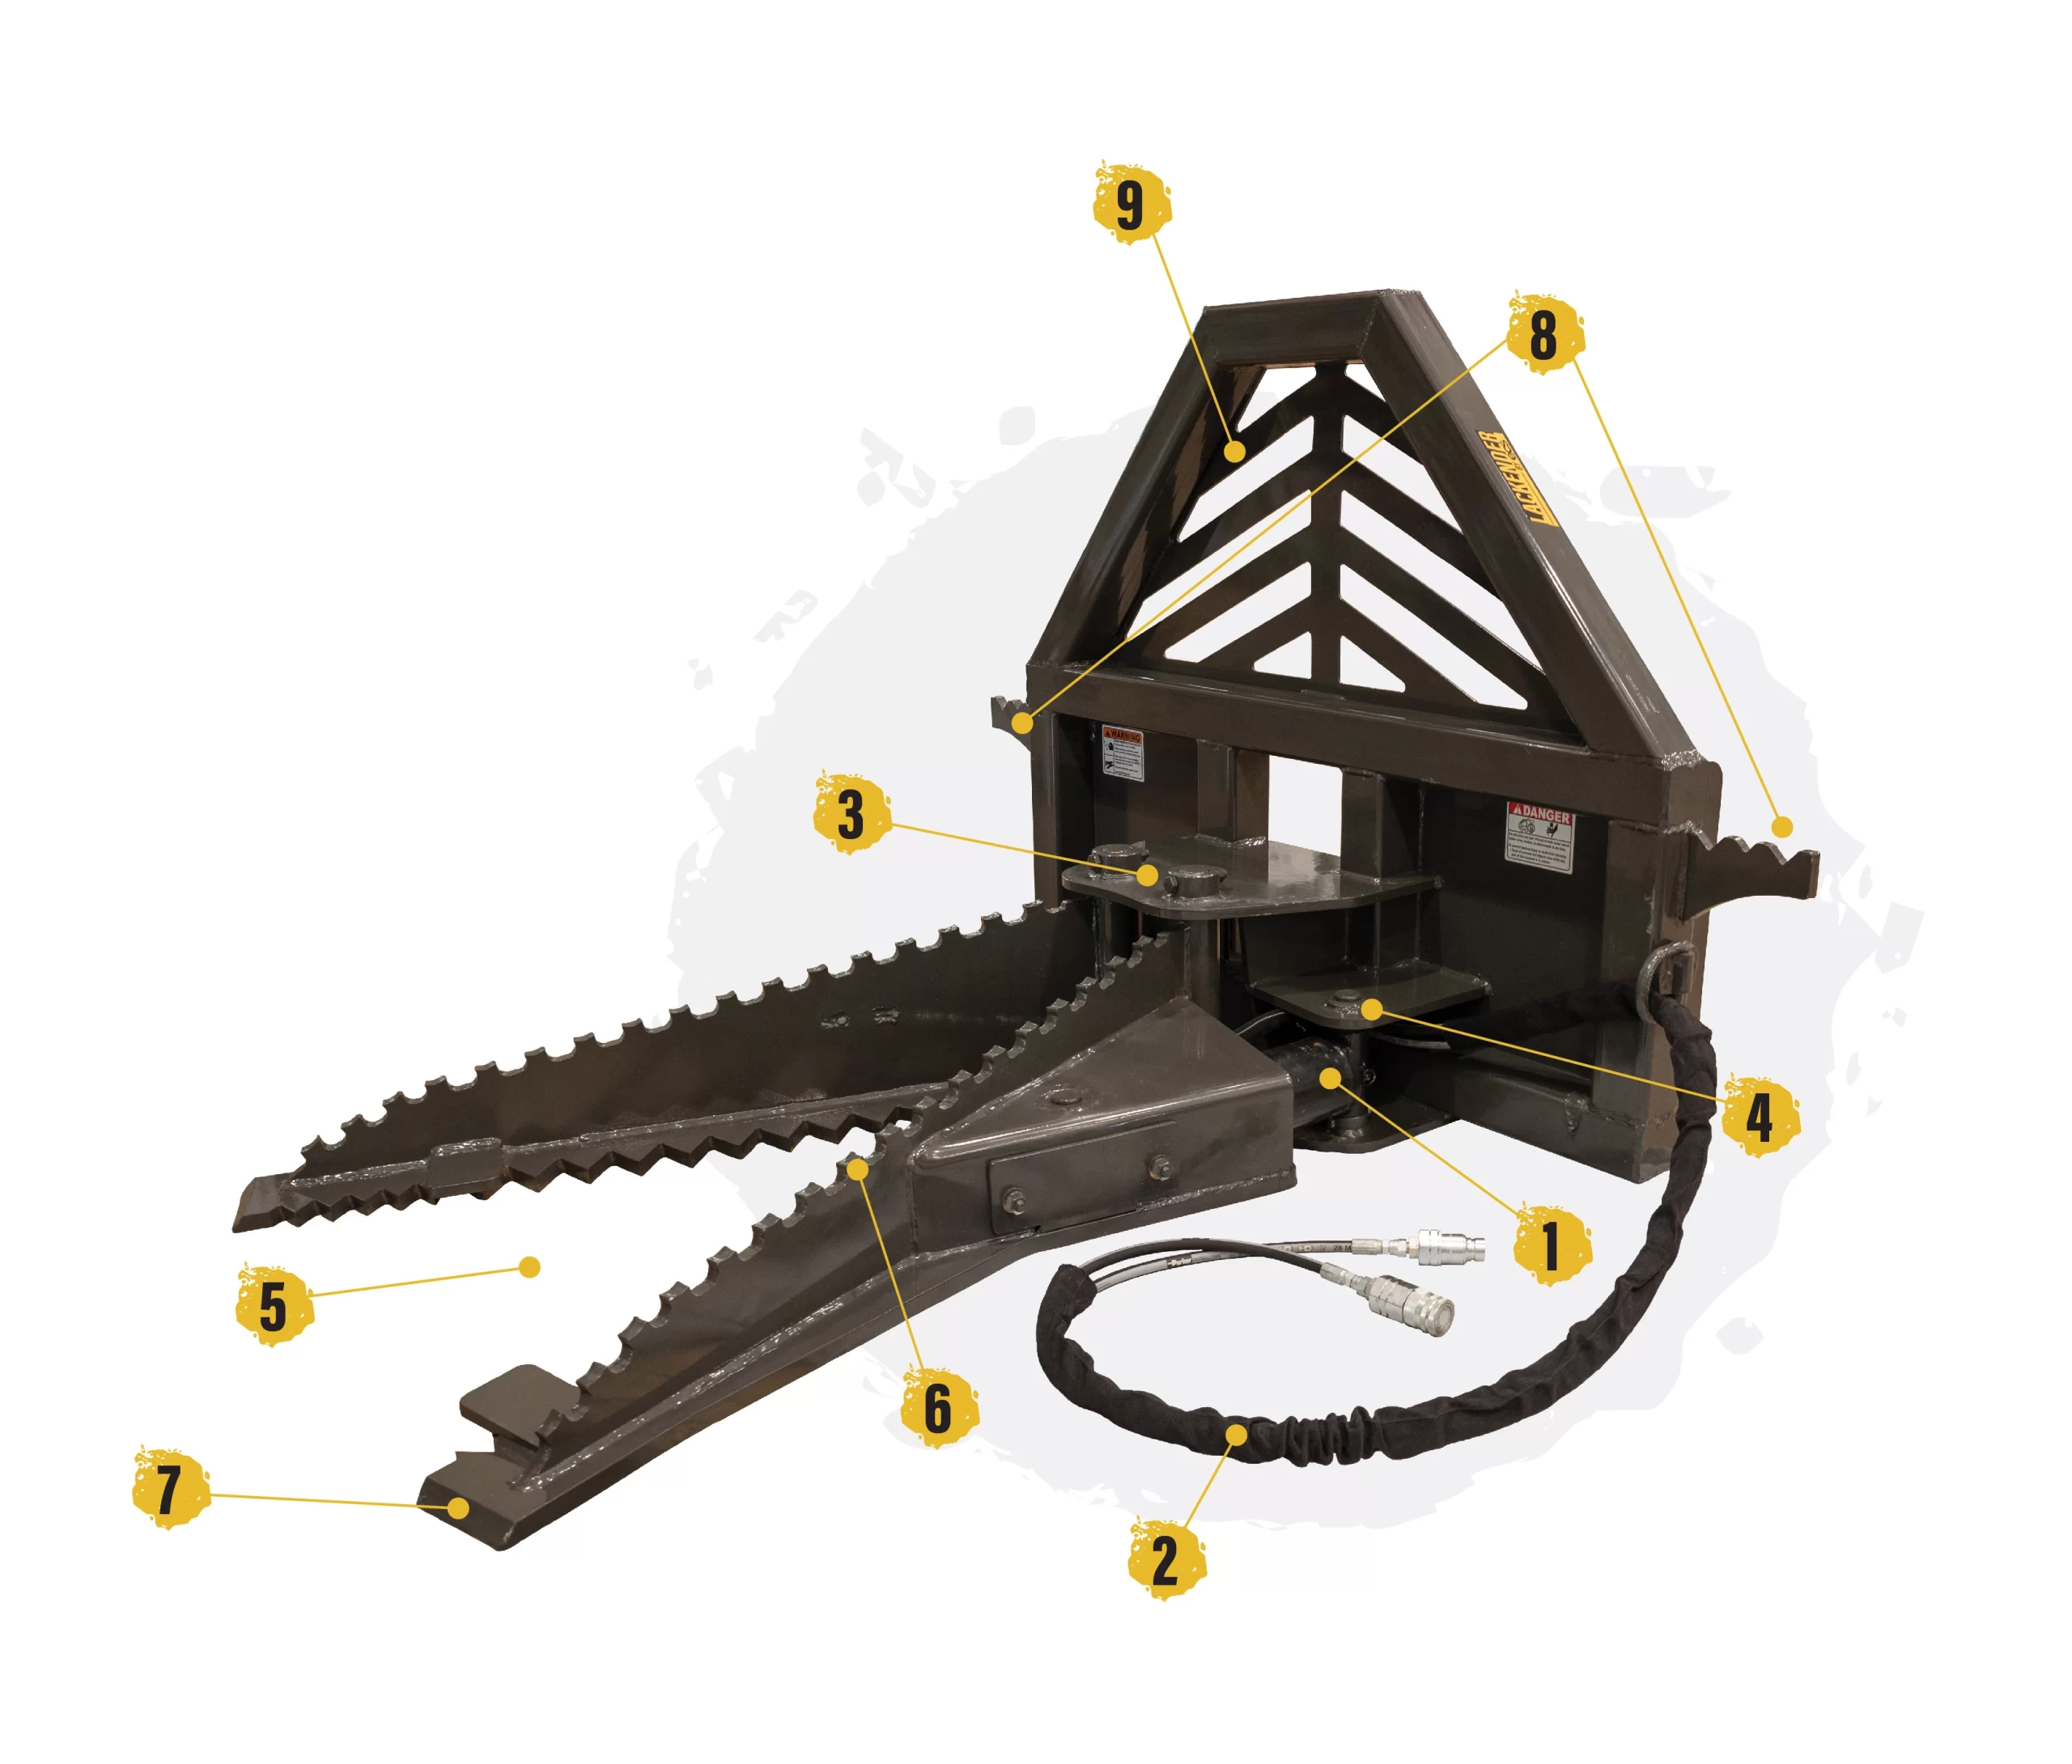 Terminator Tree Puller & Stump Remover Skid Steer Attachment Model with Pointed Out Features